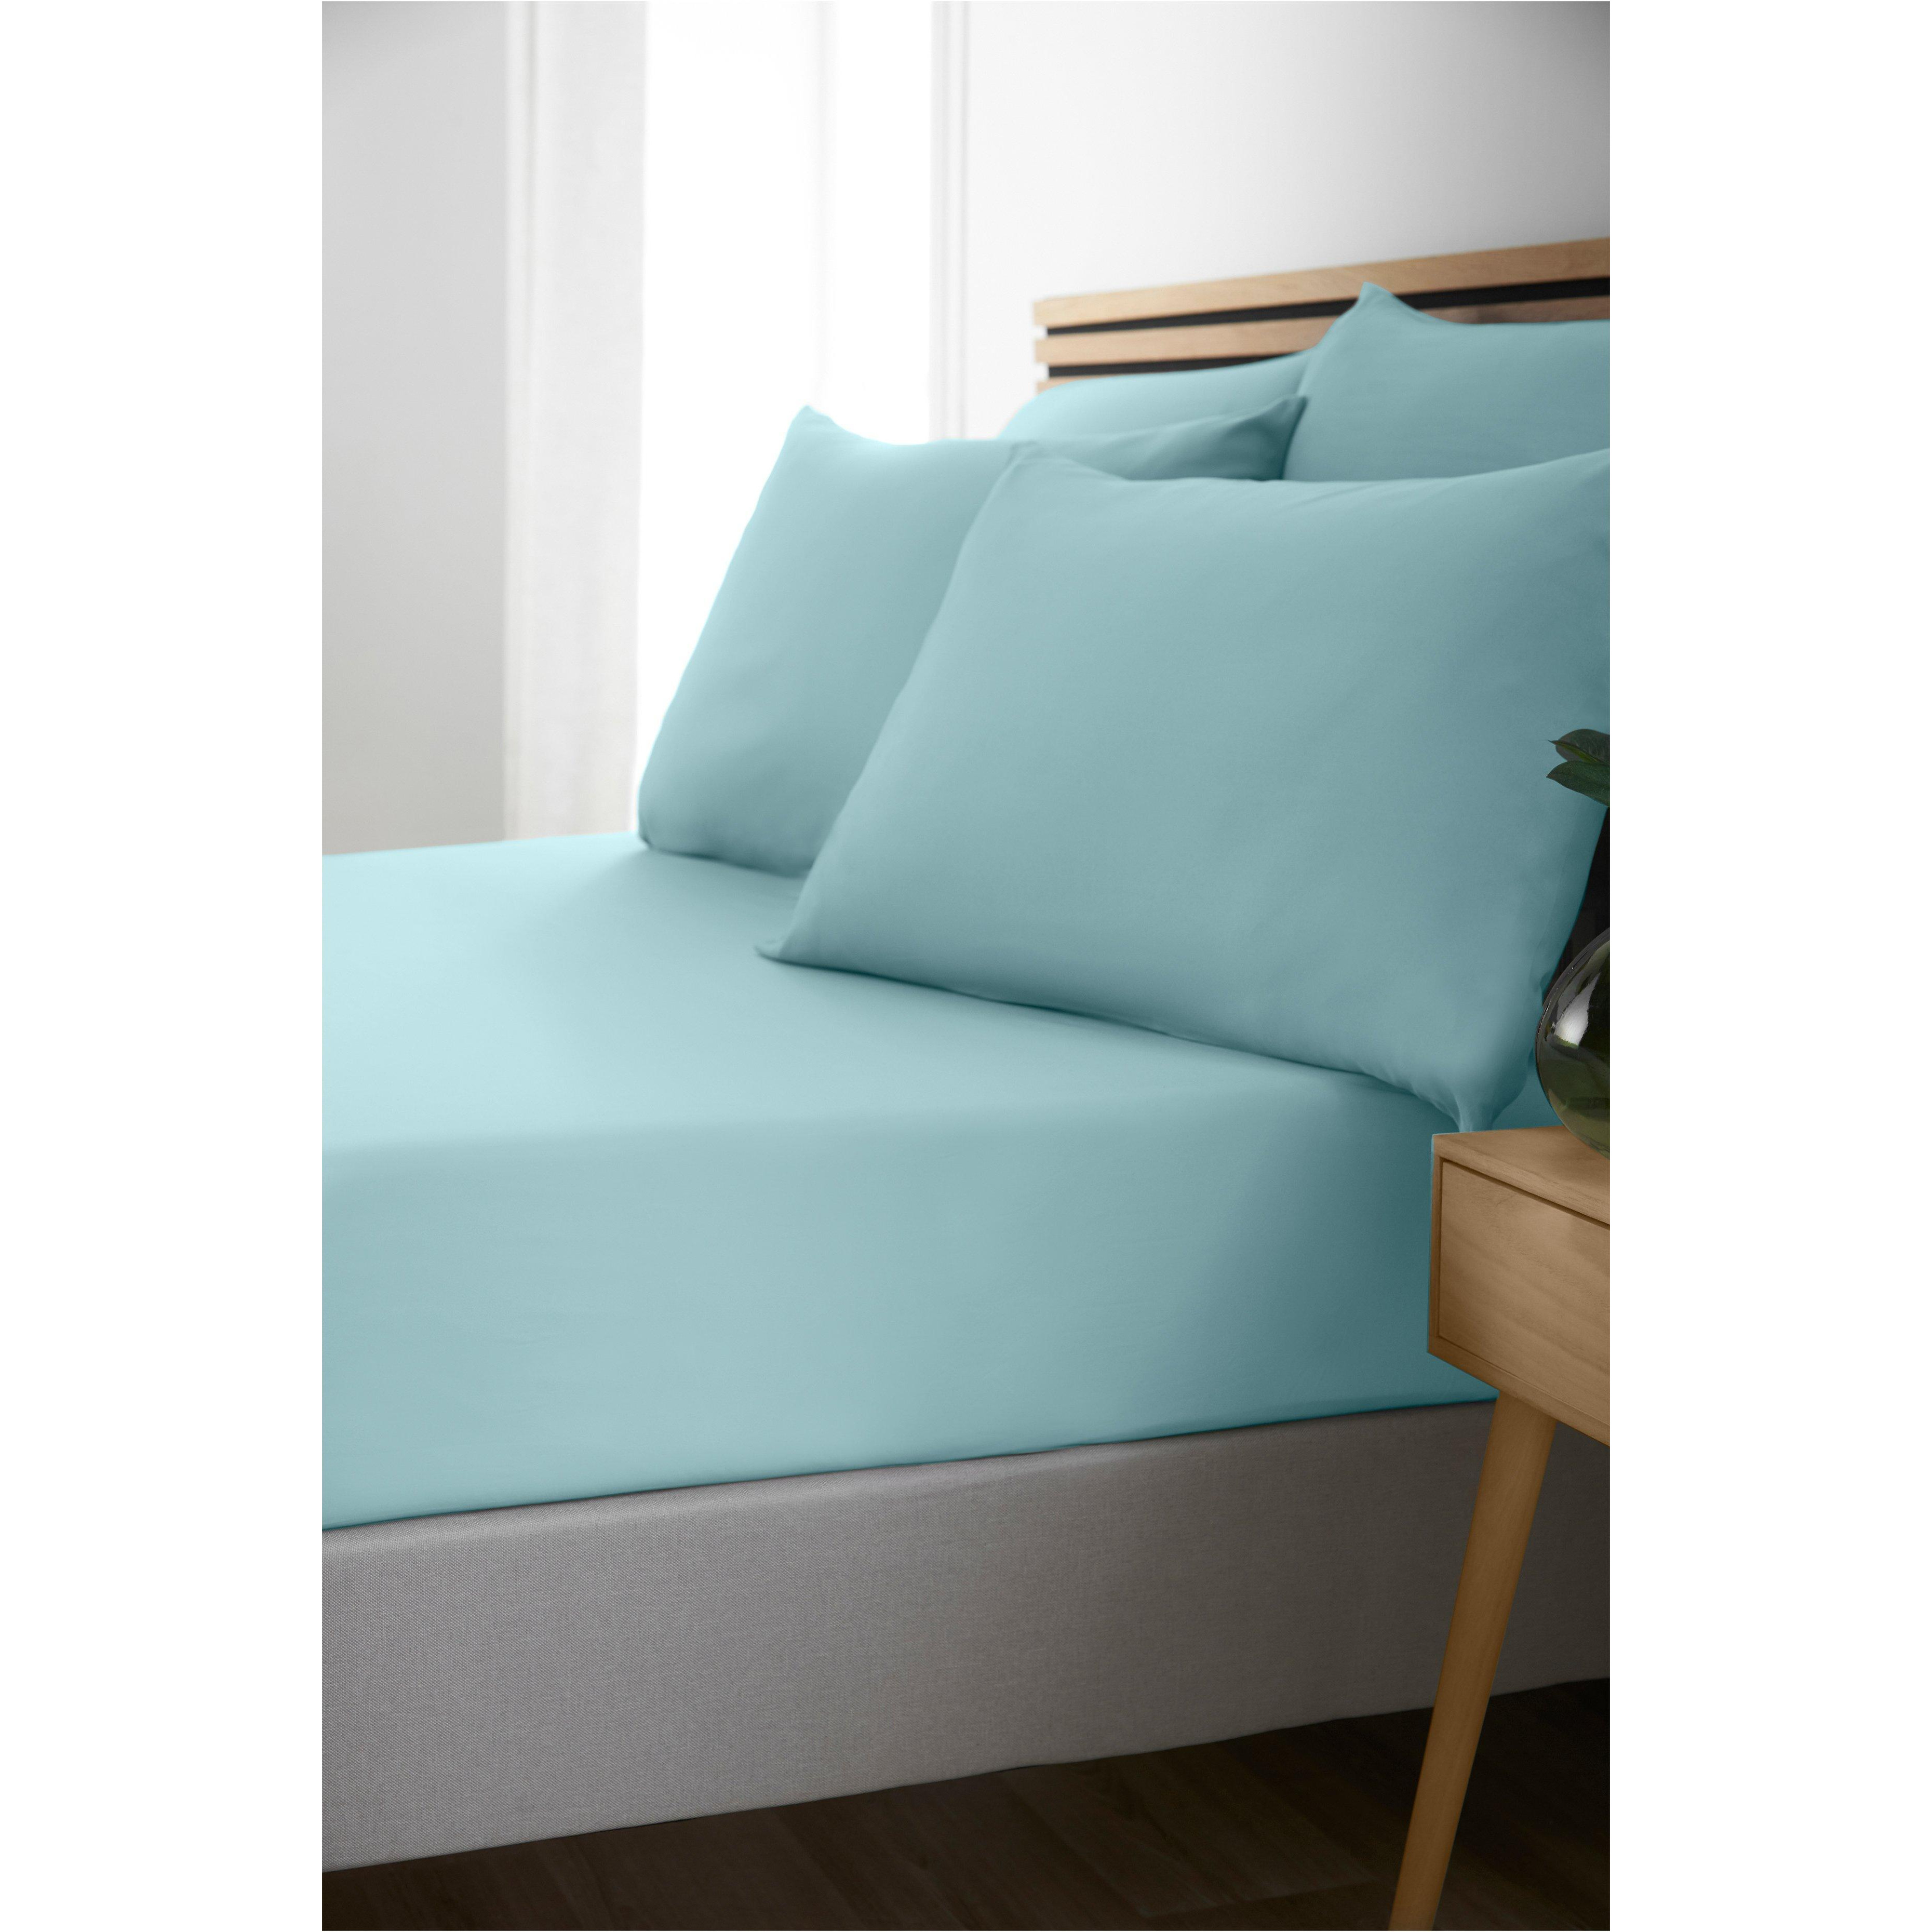 'So Soft Easy Iron' Fitted Sheet - image 1